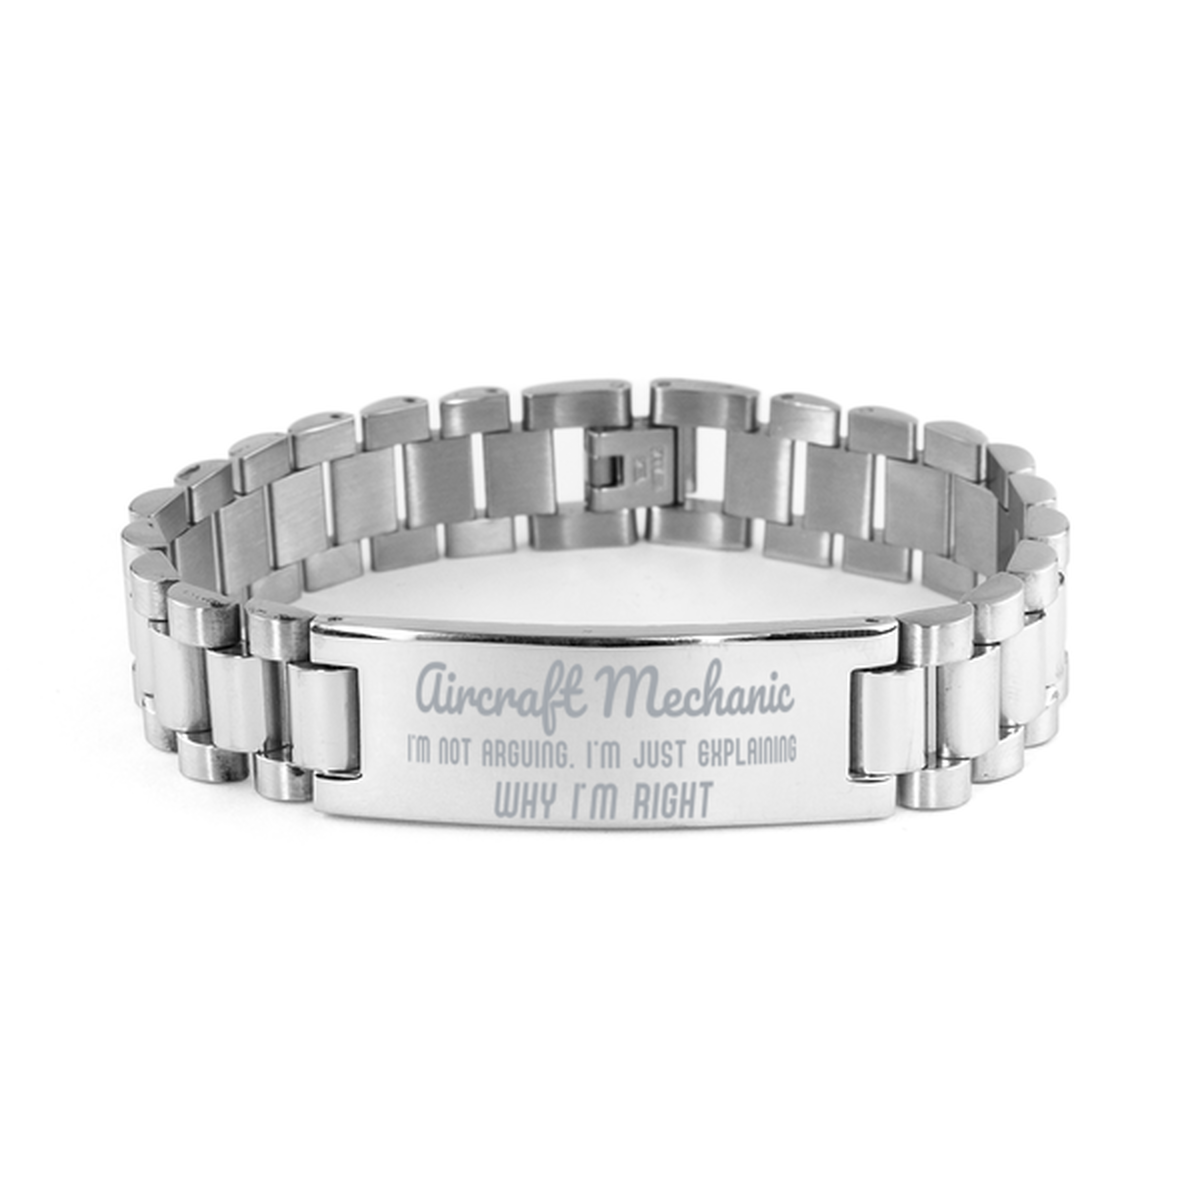 Aircraft Mechanic I'm not Arguing. I'm Just Explaining Why I'm RIGHT Ladder Stainless Steel Bracelet, Graduation Birthday Christmas Aircraft Mechanic Gifts For Aircraft Mechanic Funny Saying Quote Present for Men Women Coworker